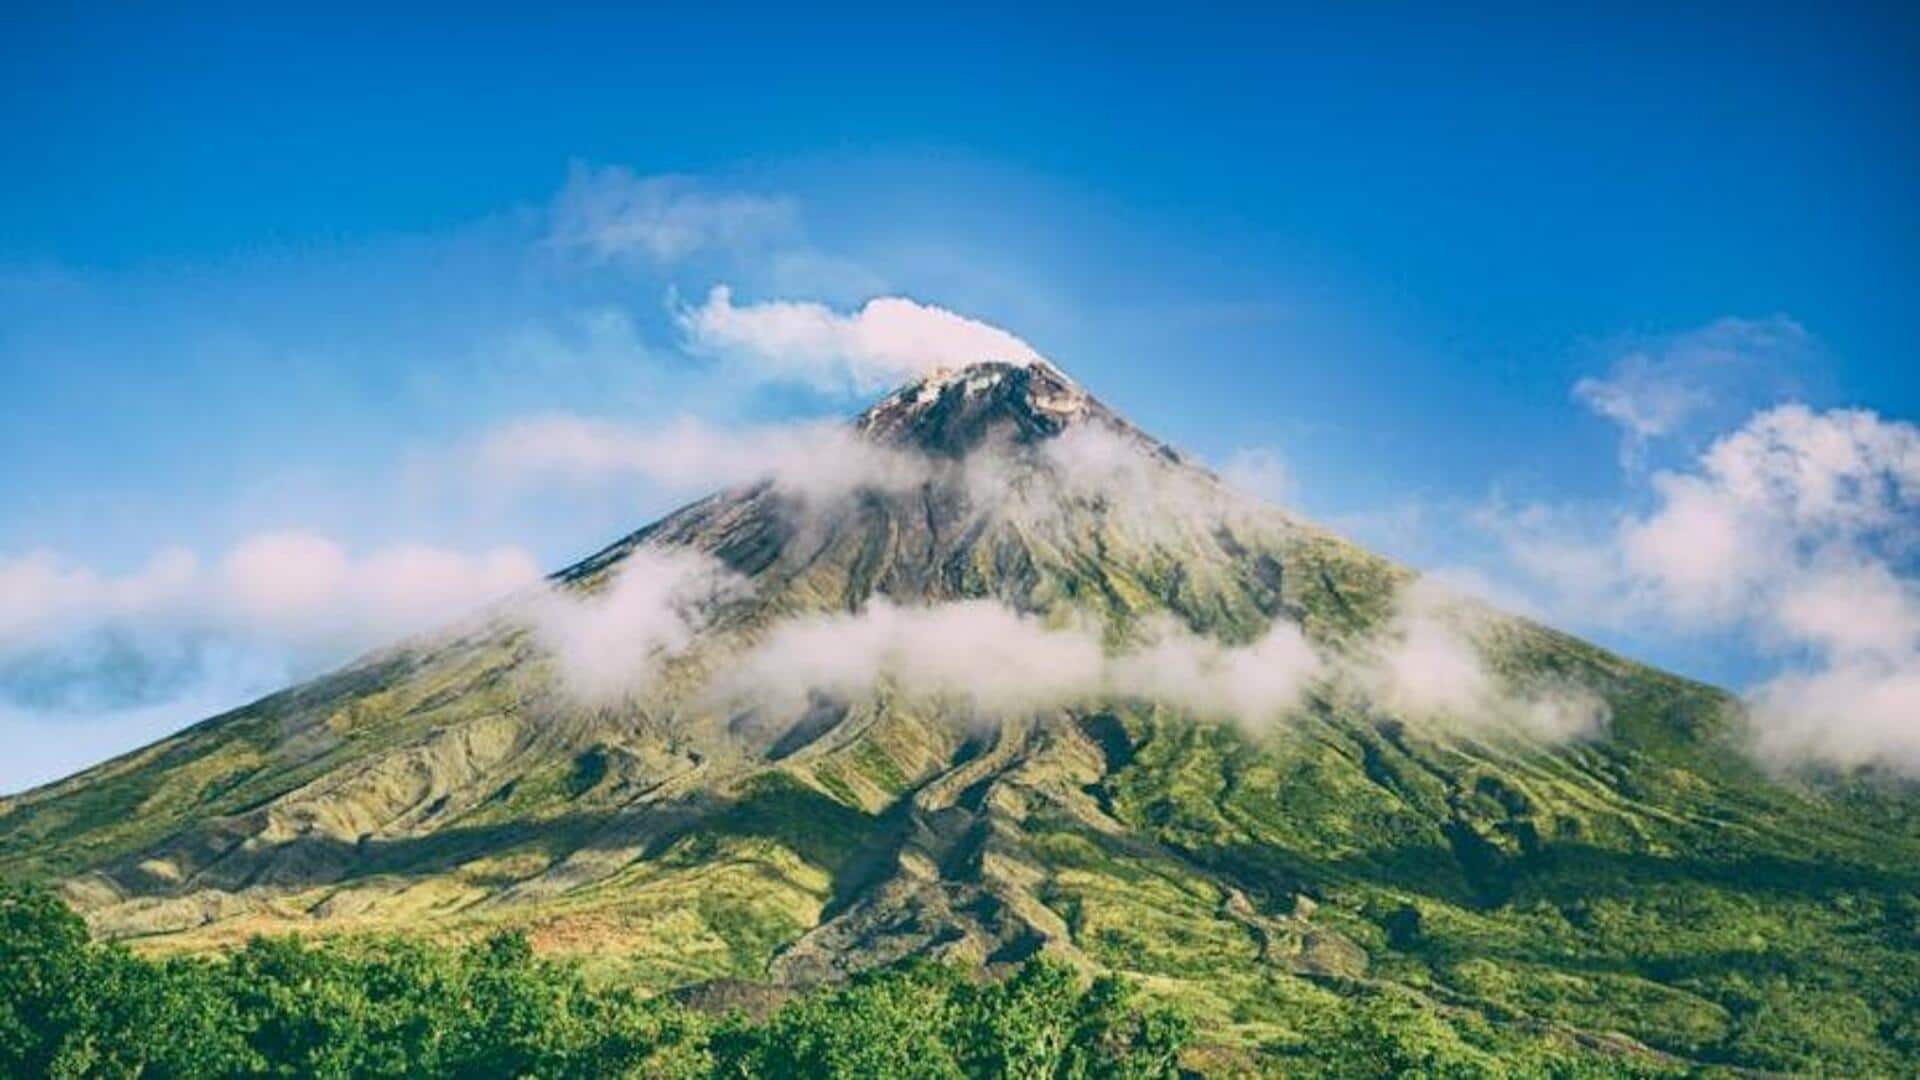 Go for a volcanic adventure to Arenal, Costa Rica